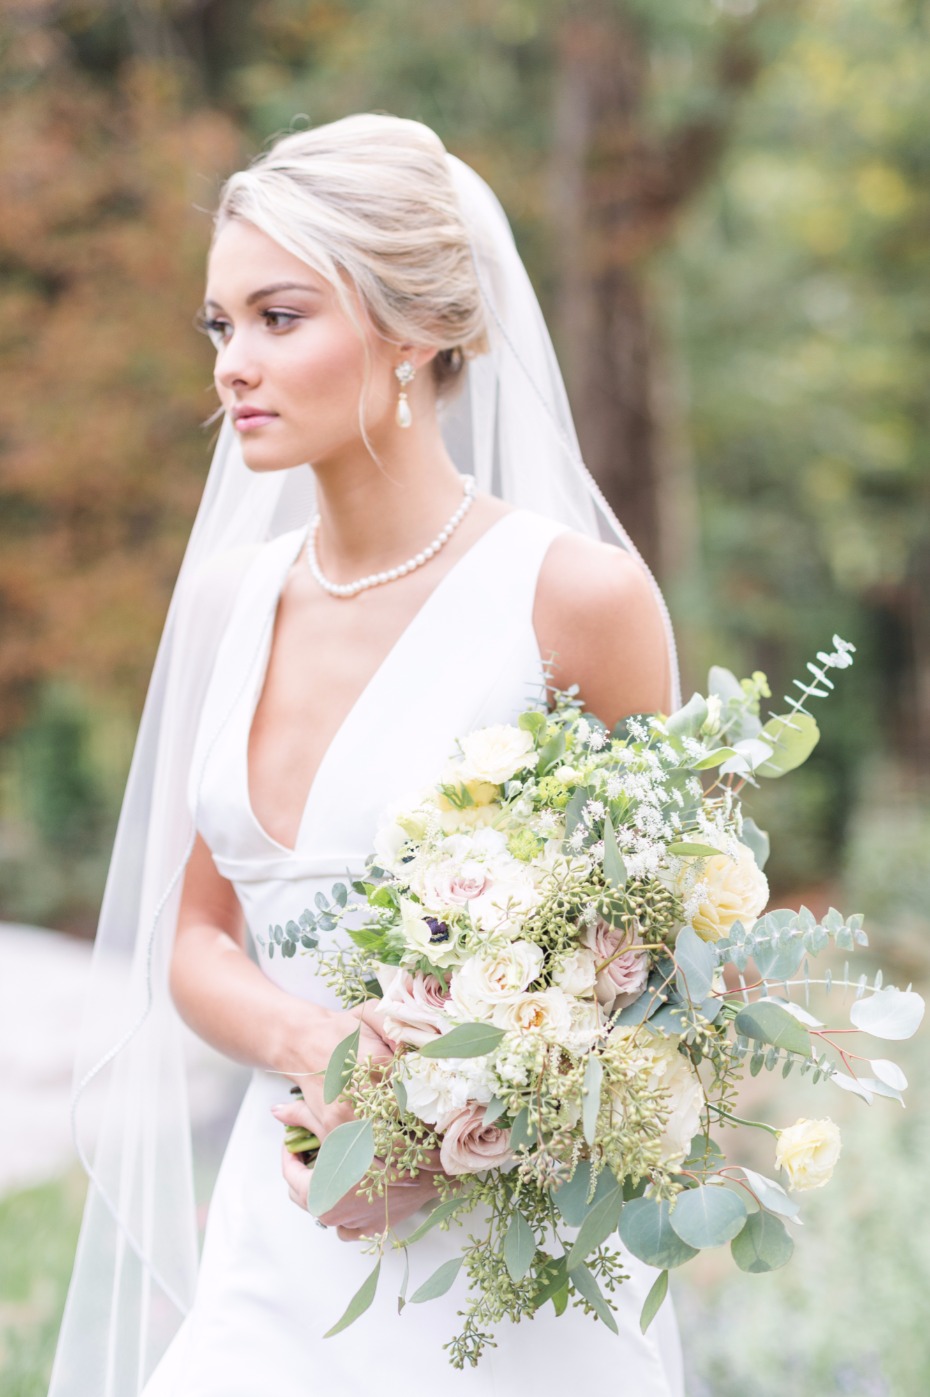 chic and put together bridal style